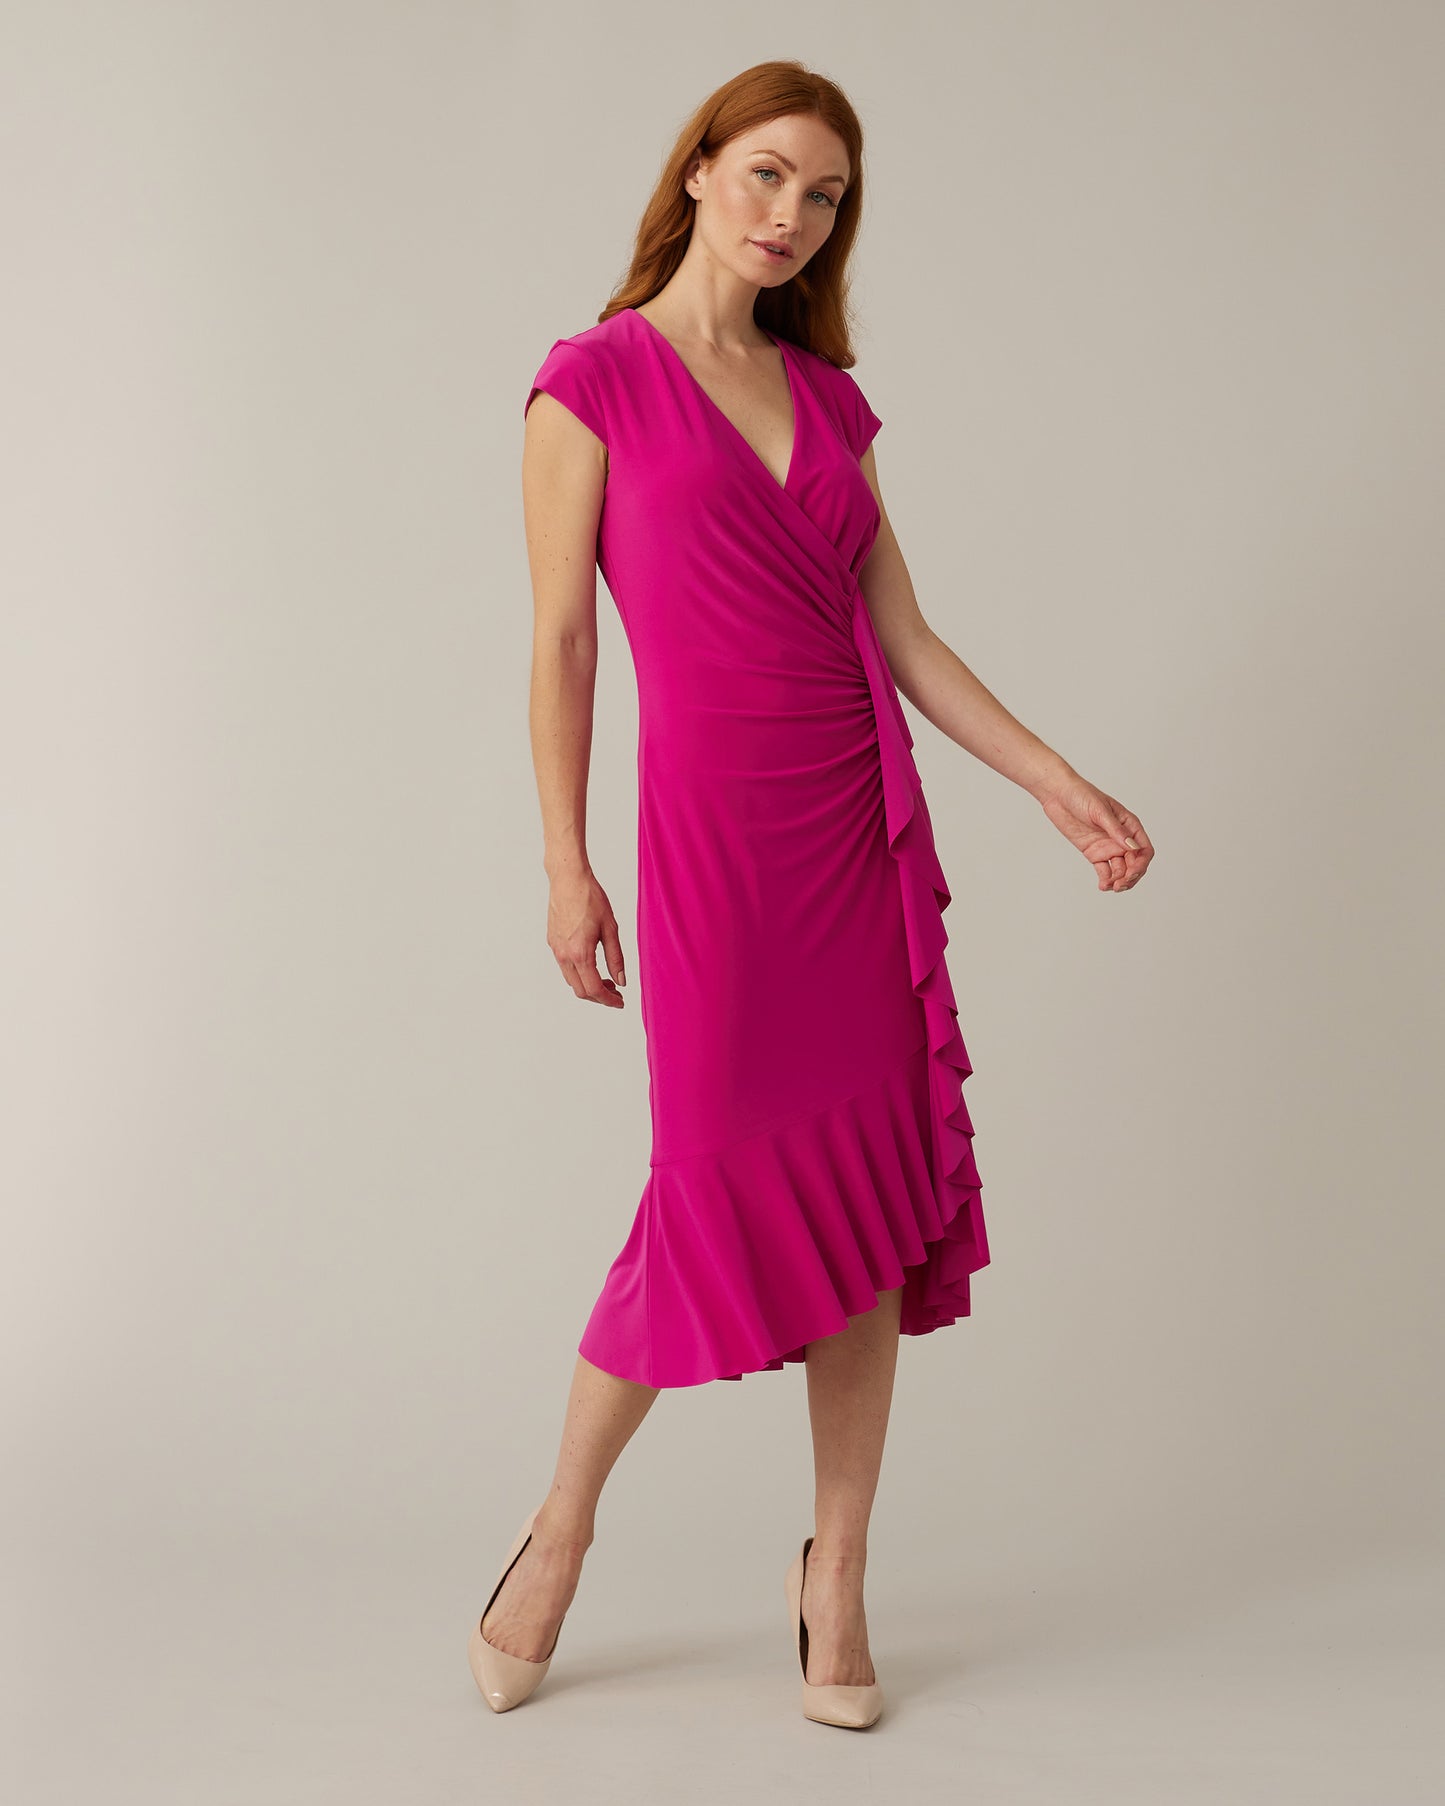 Joseph Ribkoff - Wrap Style Dress - Style 221364 - Orchid 50% off - size 12 left